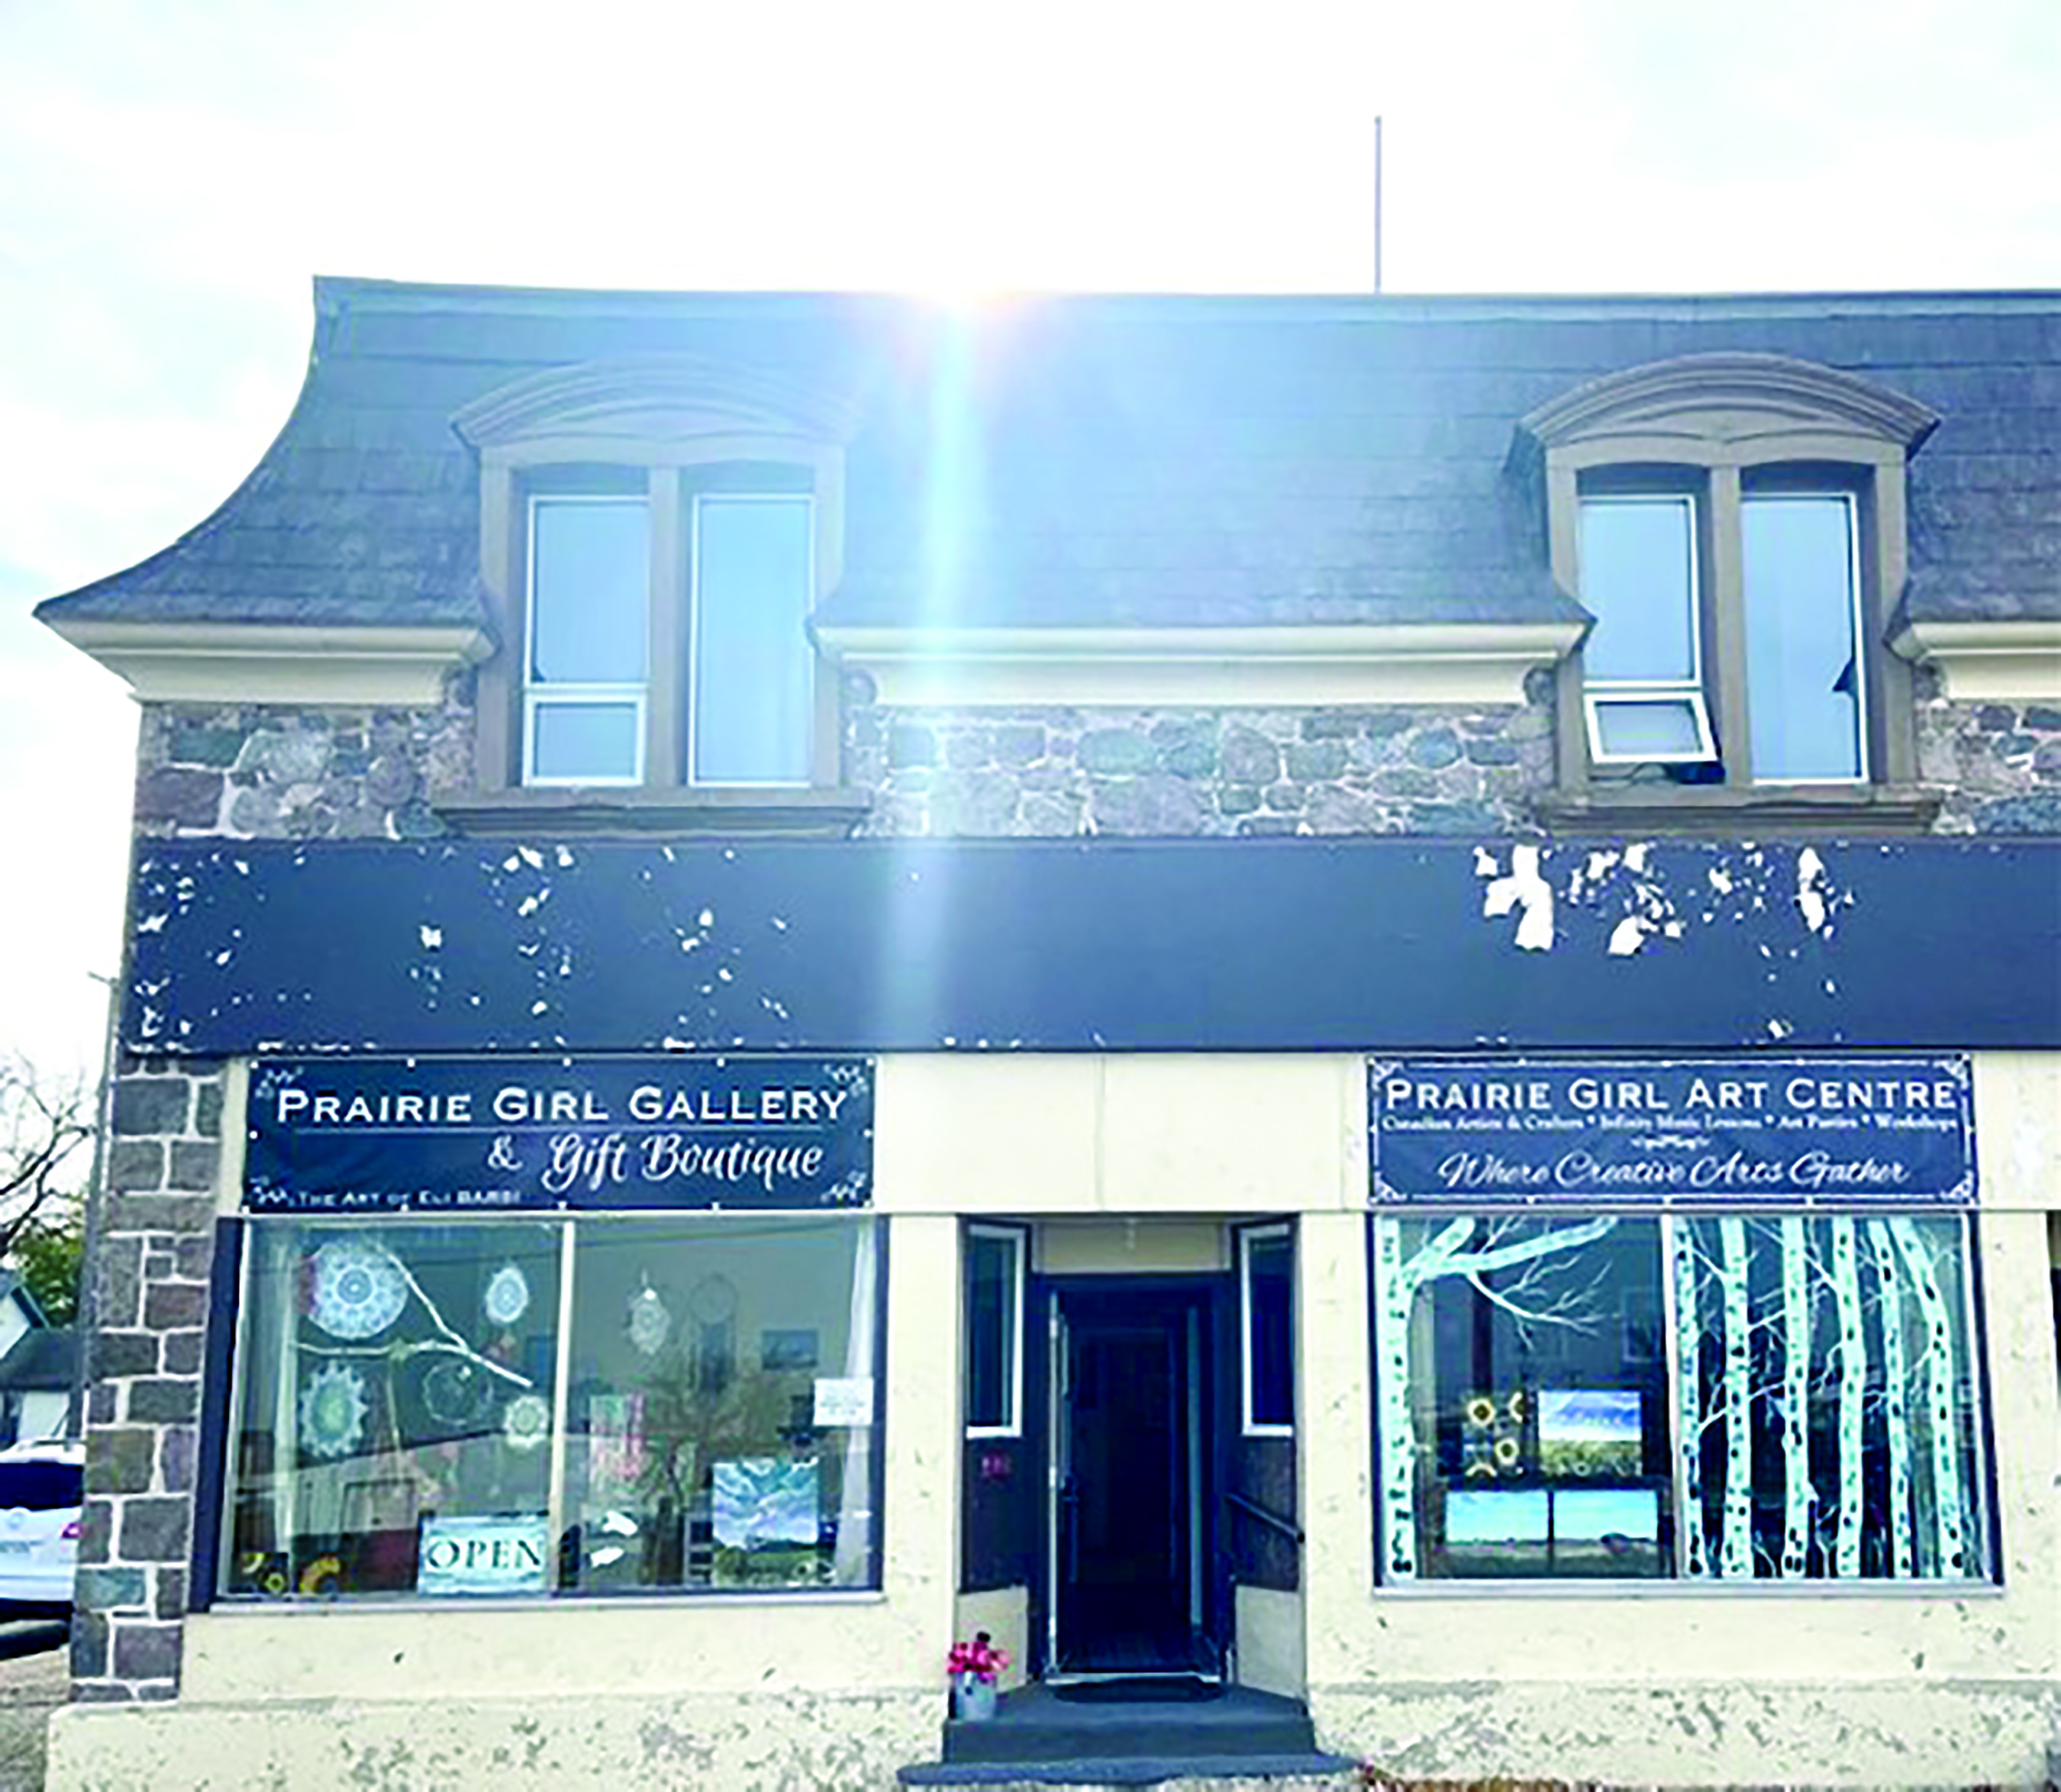 The Prairie Girl Gallery and Gift Boutique and the<br />
Prairie Girl Art Centre in the historic McNaughton Building.